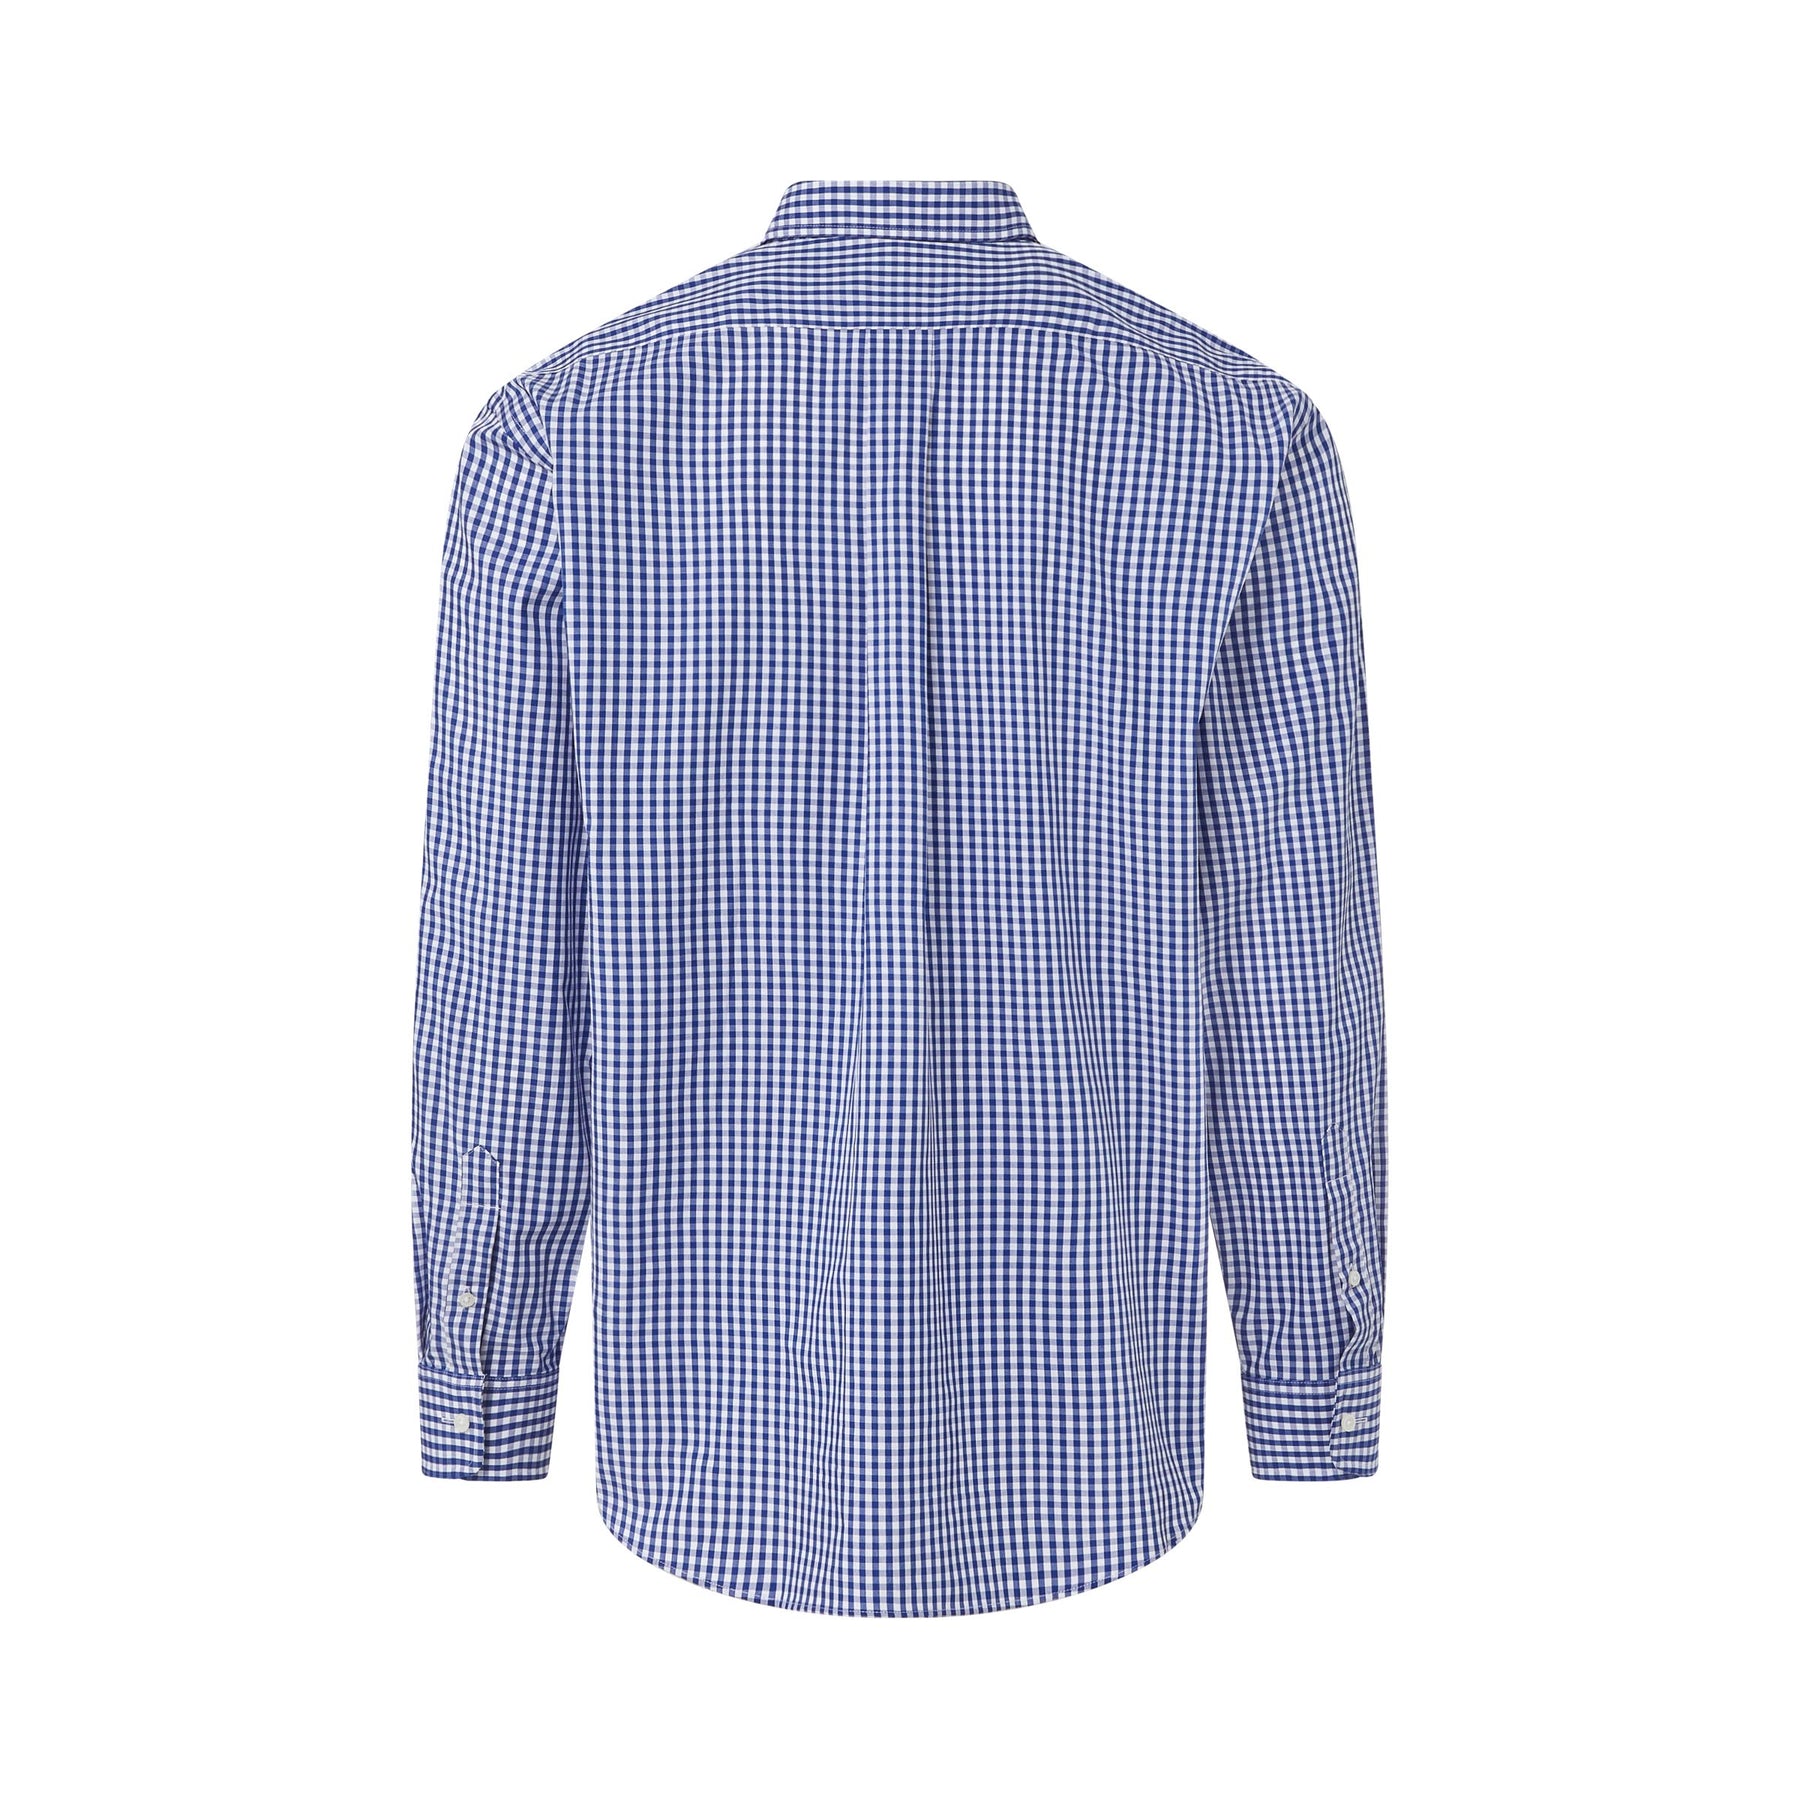 Long Sleeve Navy and White Classic Button Down Collar Plaid Shirt with Magnetic Closures